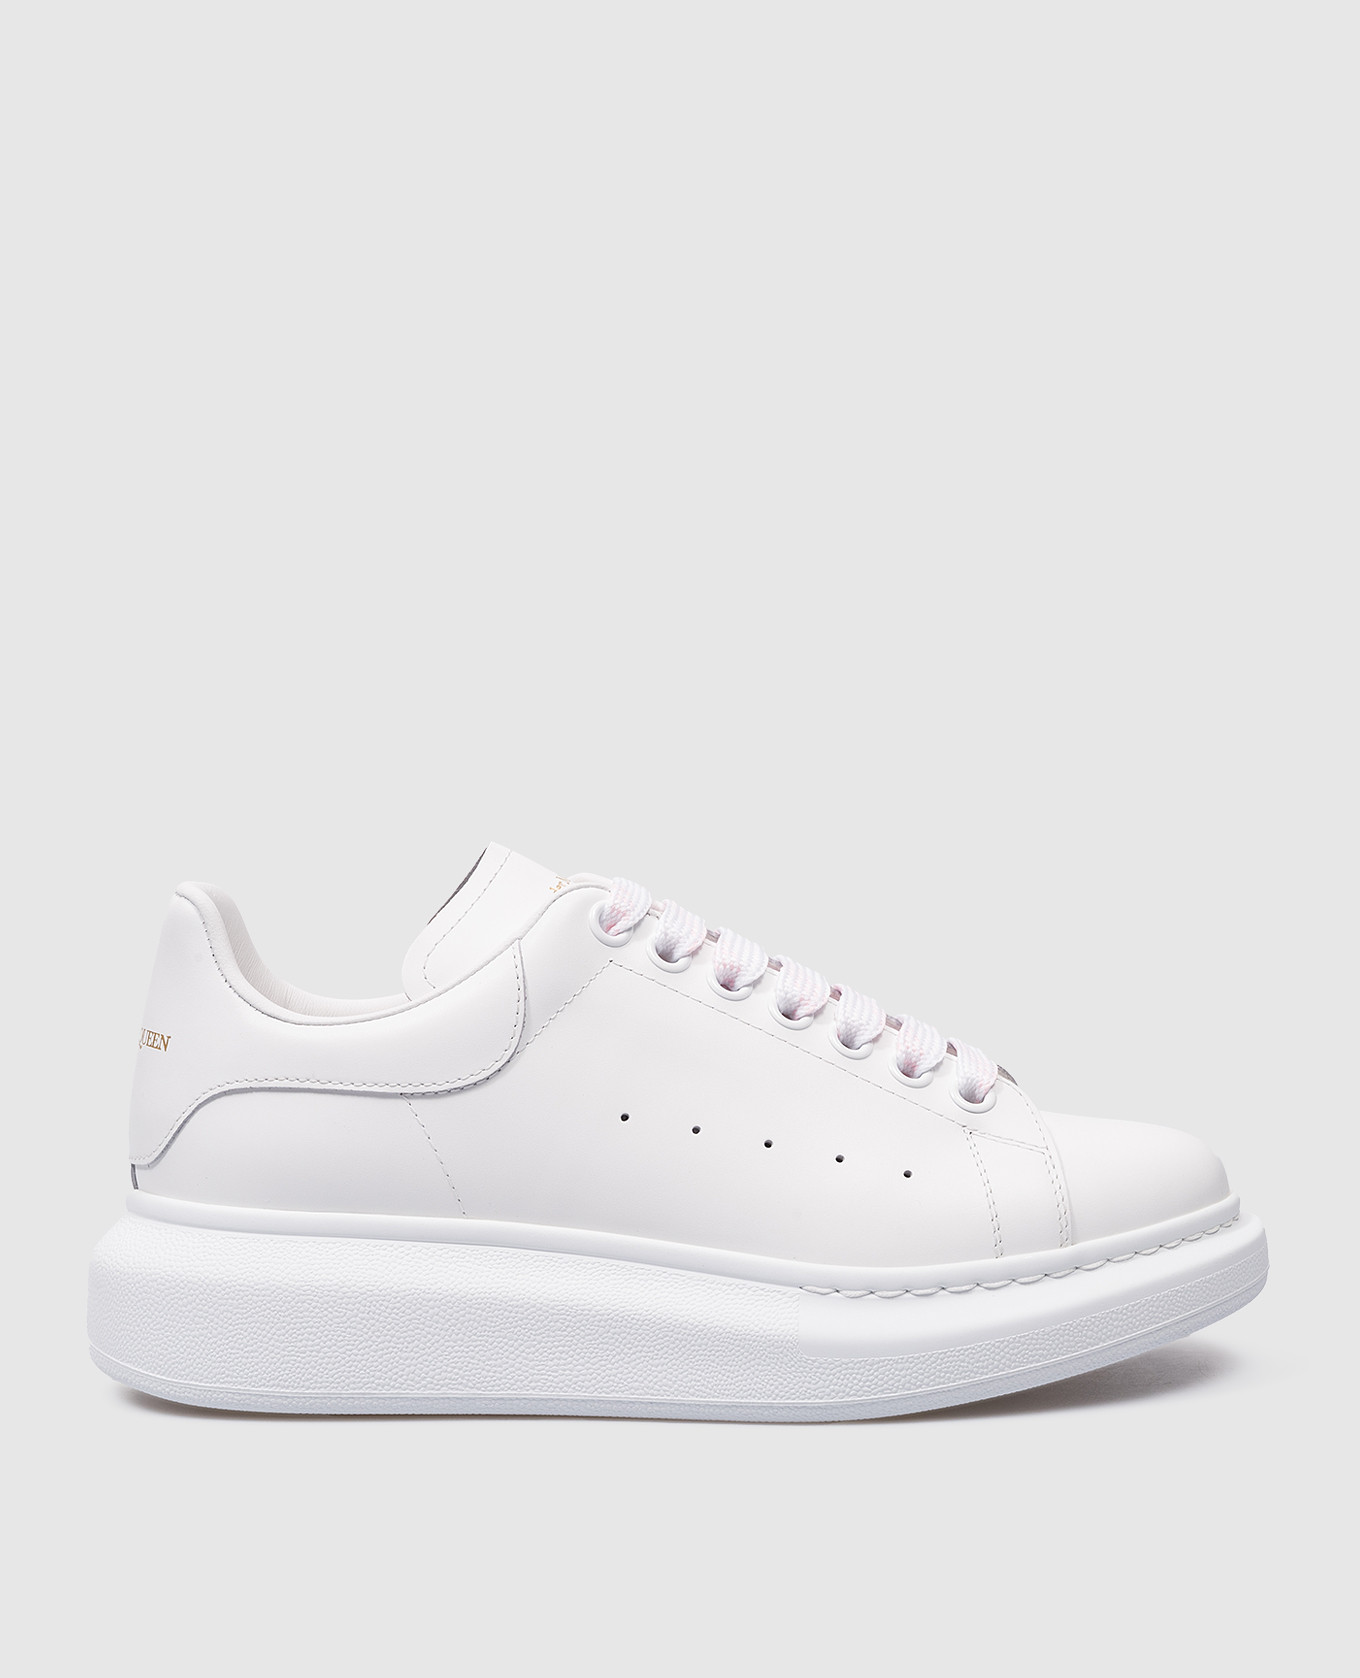 Oversized white leather sneakers